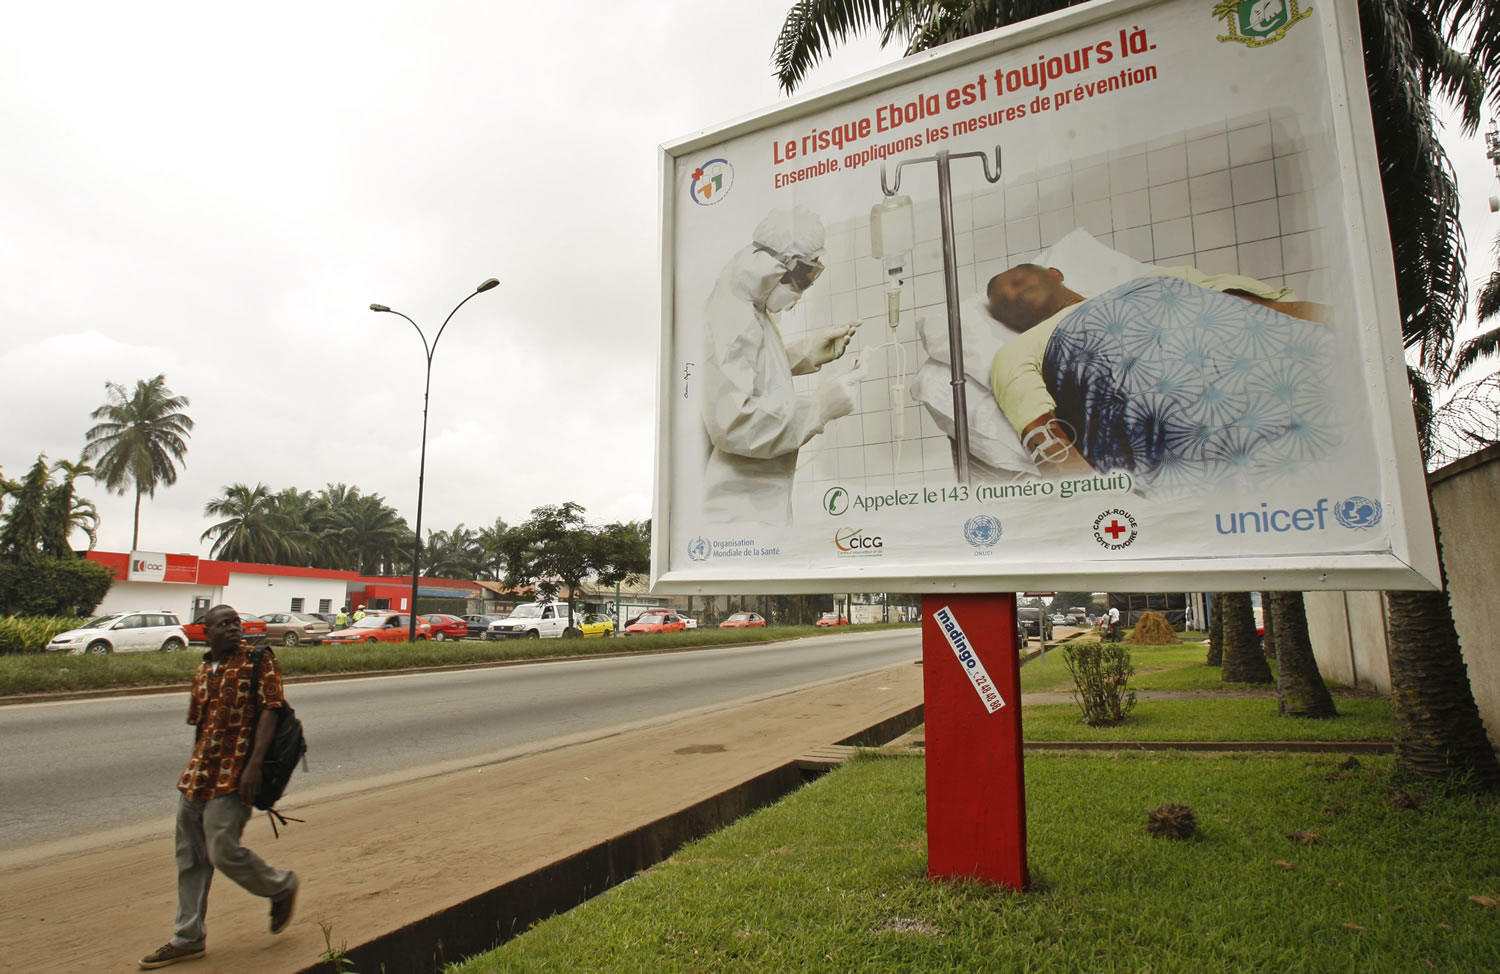 A man, left, walk past a Ebola awareness campaign poster, in the city of Abidjan, Ivory Coast, on Monday.